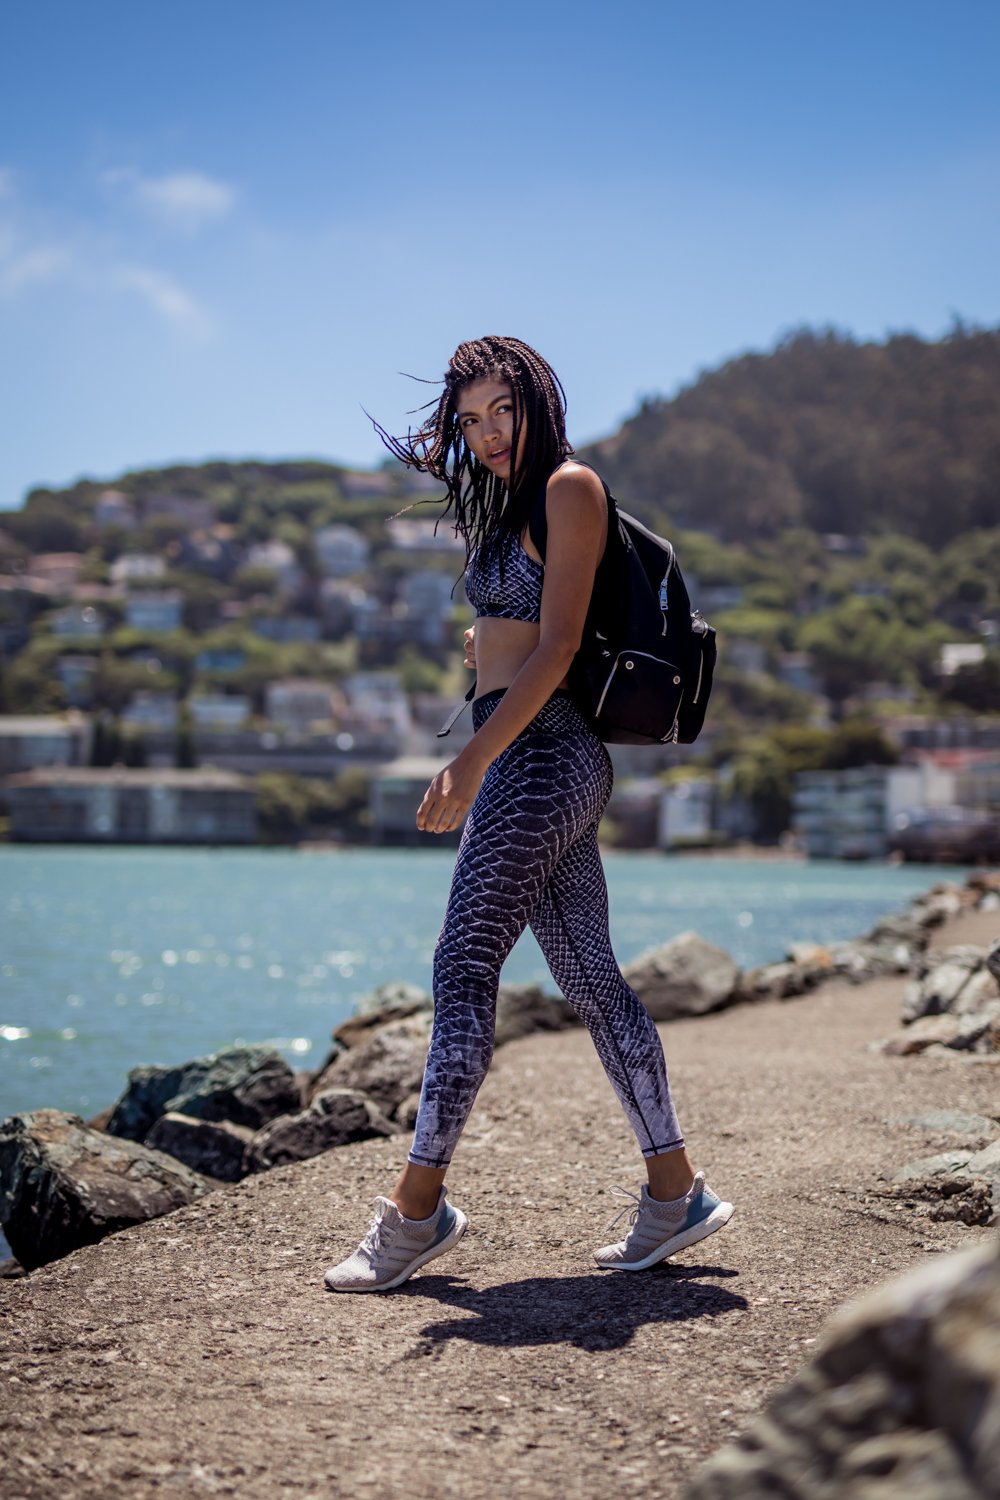 The Sports Edit Fact Fiction Lea backpack and nible snake print leggings and sports bra outfit